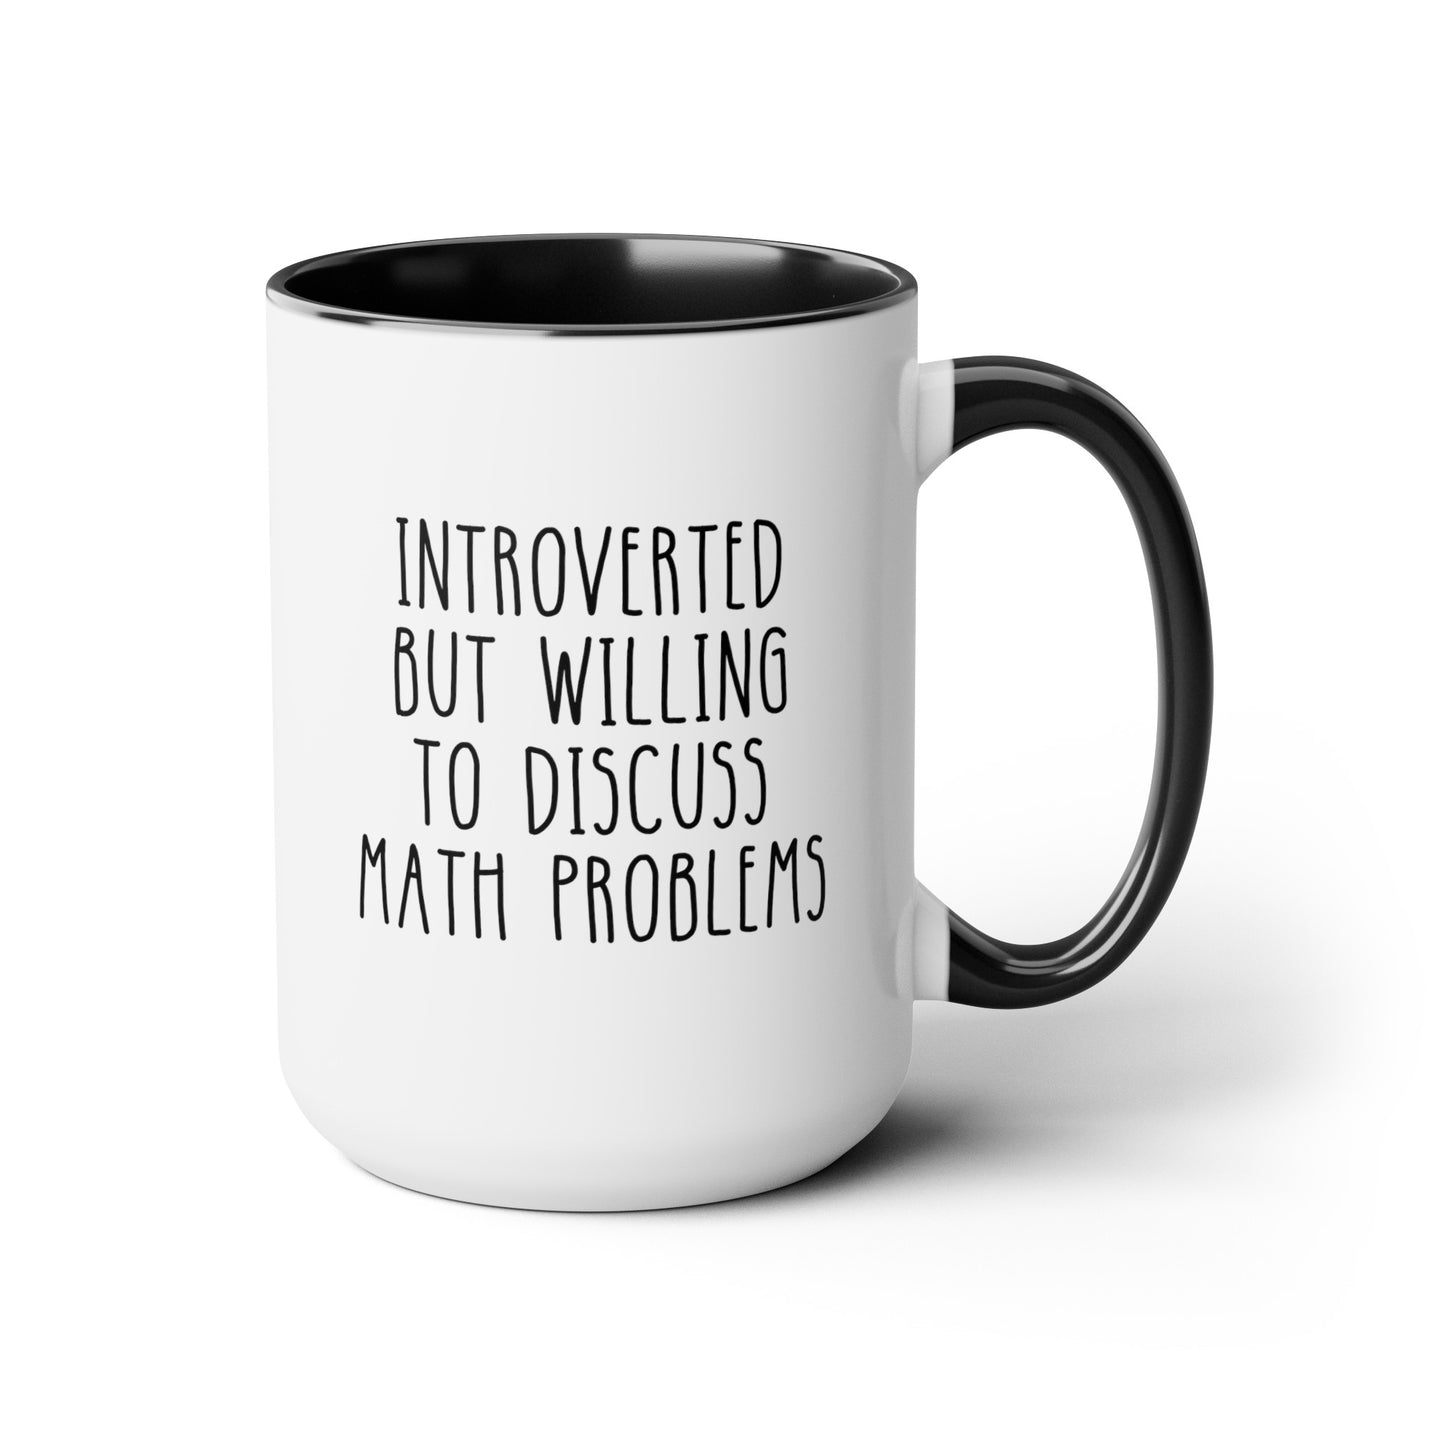 Introverted But Willing To Discuss Math Problems 15oz white with black accent funny large coffee mug gift for introvert mathematics geek accountant maths teacher waveywares wavey wares wavywares wavy wares